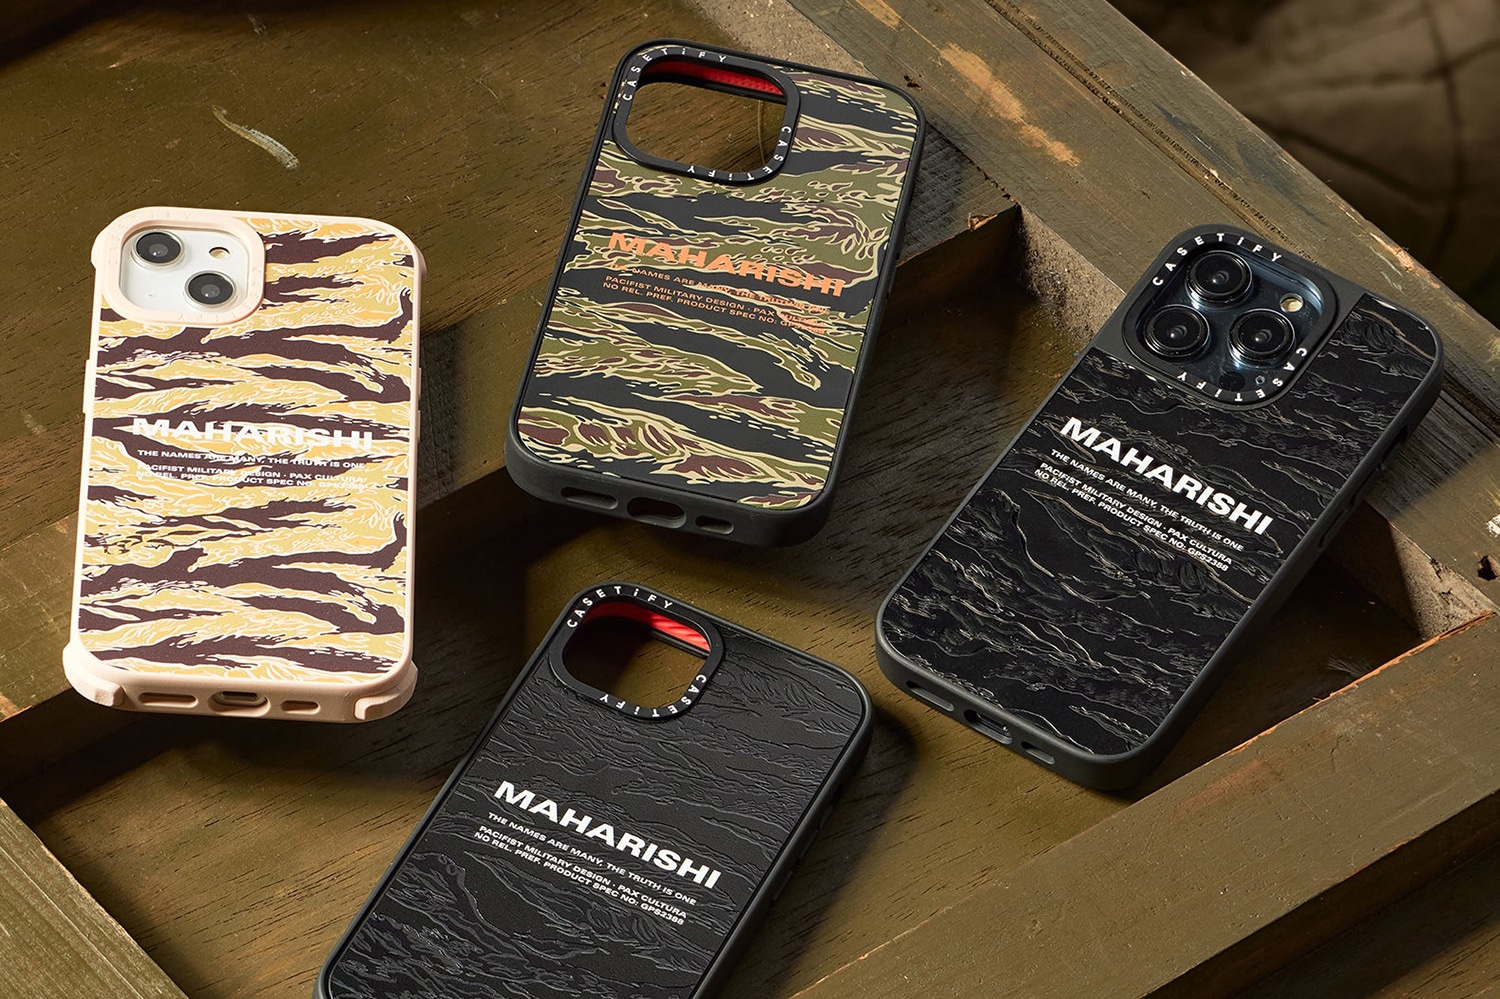 Maharishi collaborates with CASETiFY for a range of small accessories comprised of sustainably produced compostable and recycled cases. CASETiFY's production facilities are ISO14001-certified, for employing processes within their manufacturing such as rainwater collection, advanced recycling systems, fully circular sourcing for materials using plant-based & BPA free plastics as well as non-toxic soy based ink. Most notably within CASETiFY's Re/CASETiFY and Ultra Compostable line. The capsule features Maharishi's own DPM: Golden Tigerskins, a rare iteration of camouflage seen in the 60's in deep Vietnam as deployed advisor's would seek to make alterations to their uniforms in order to adapt to the climate. Contrasting typography finishes each case through Maharishi's MILTYPE - a contemporary take on MIL-SPEC marks which communicate the precise specifications of equipment. Available now at maharishistore.com, as well as in store Maharishi London and New York.